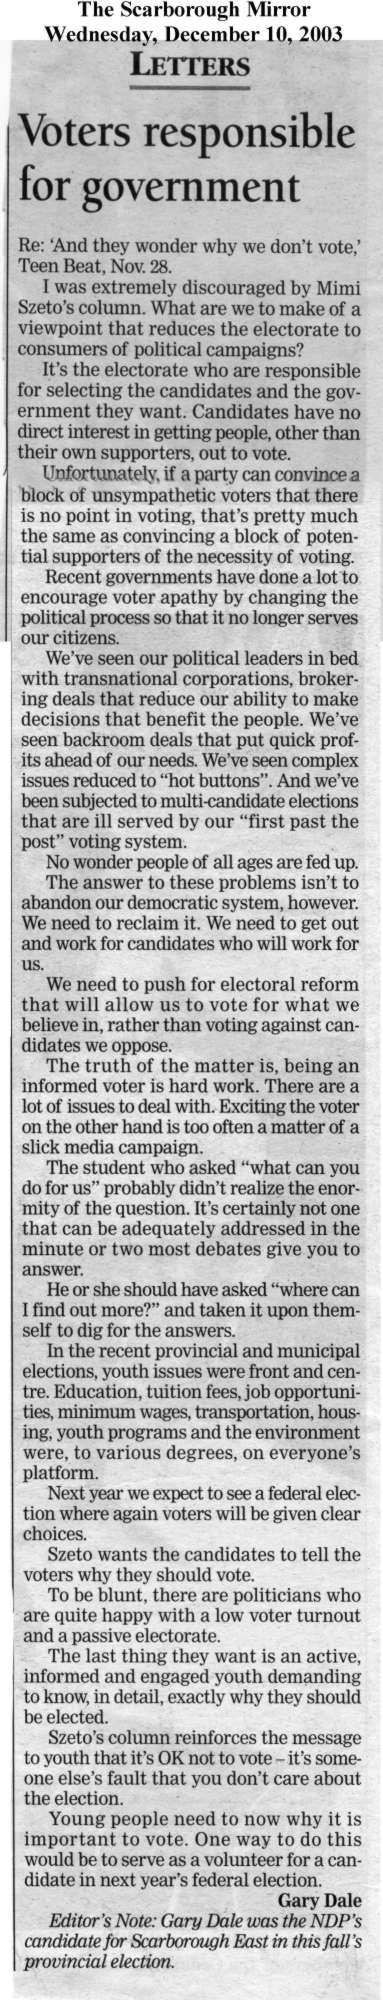 letter to The Scarborough Mirror published 2003/12/10